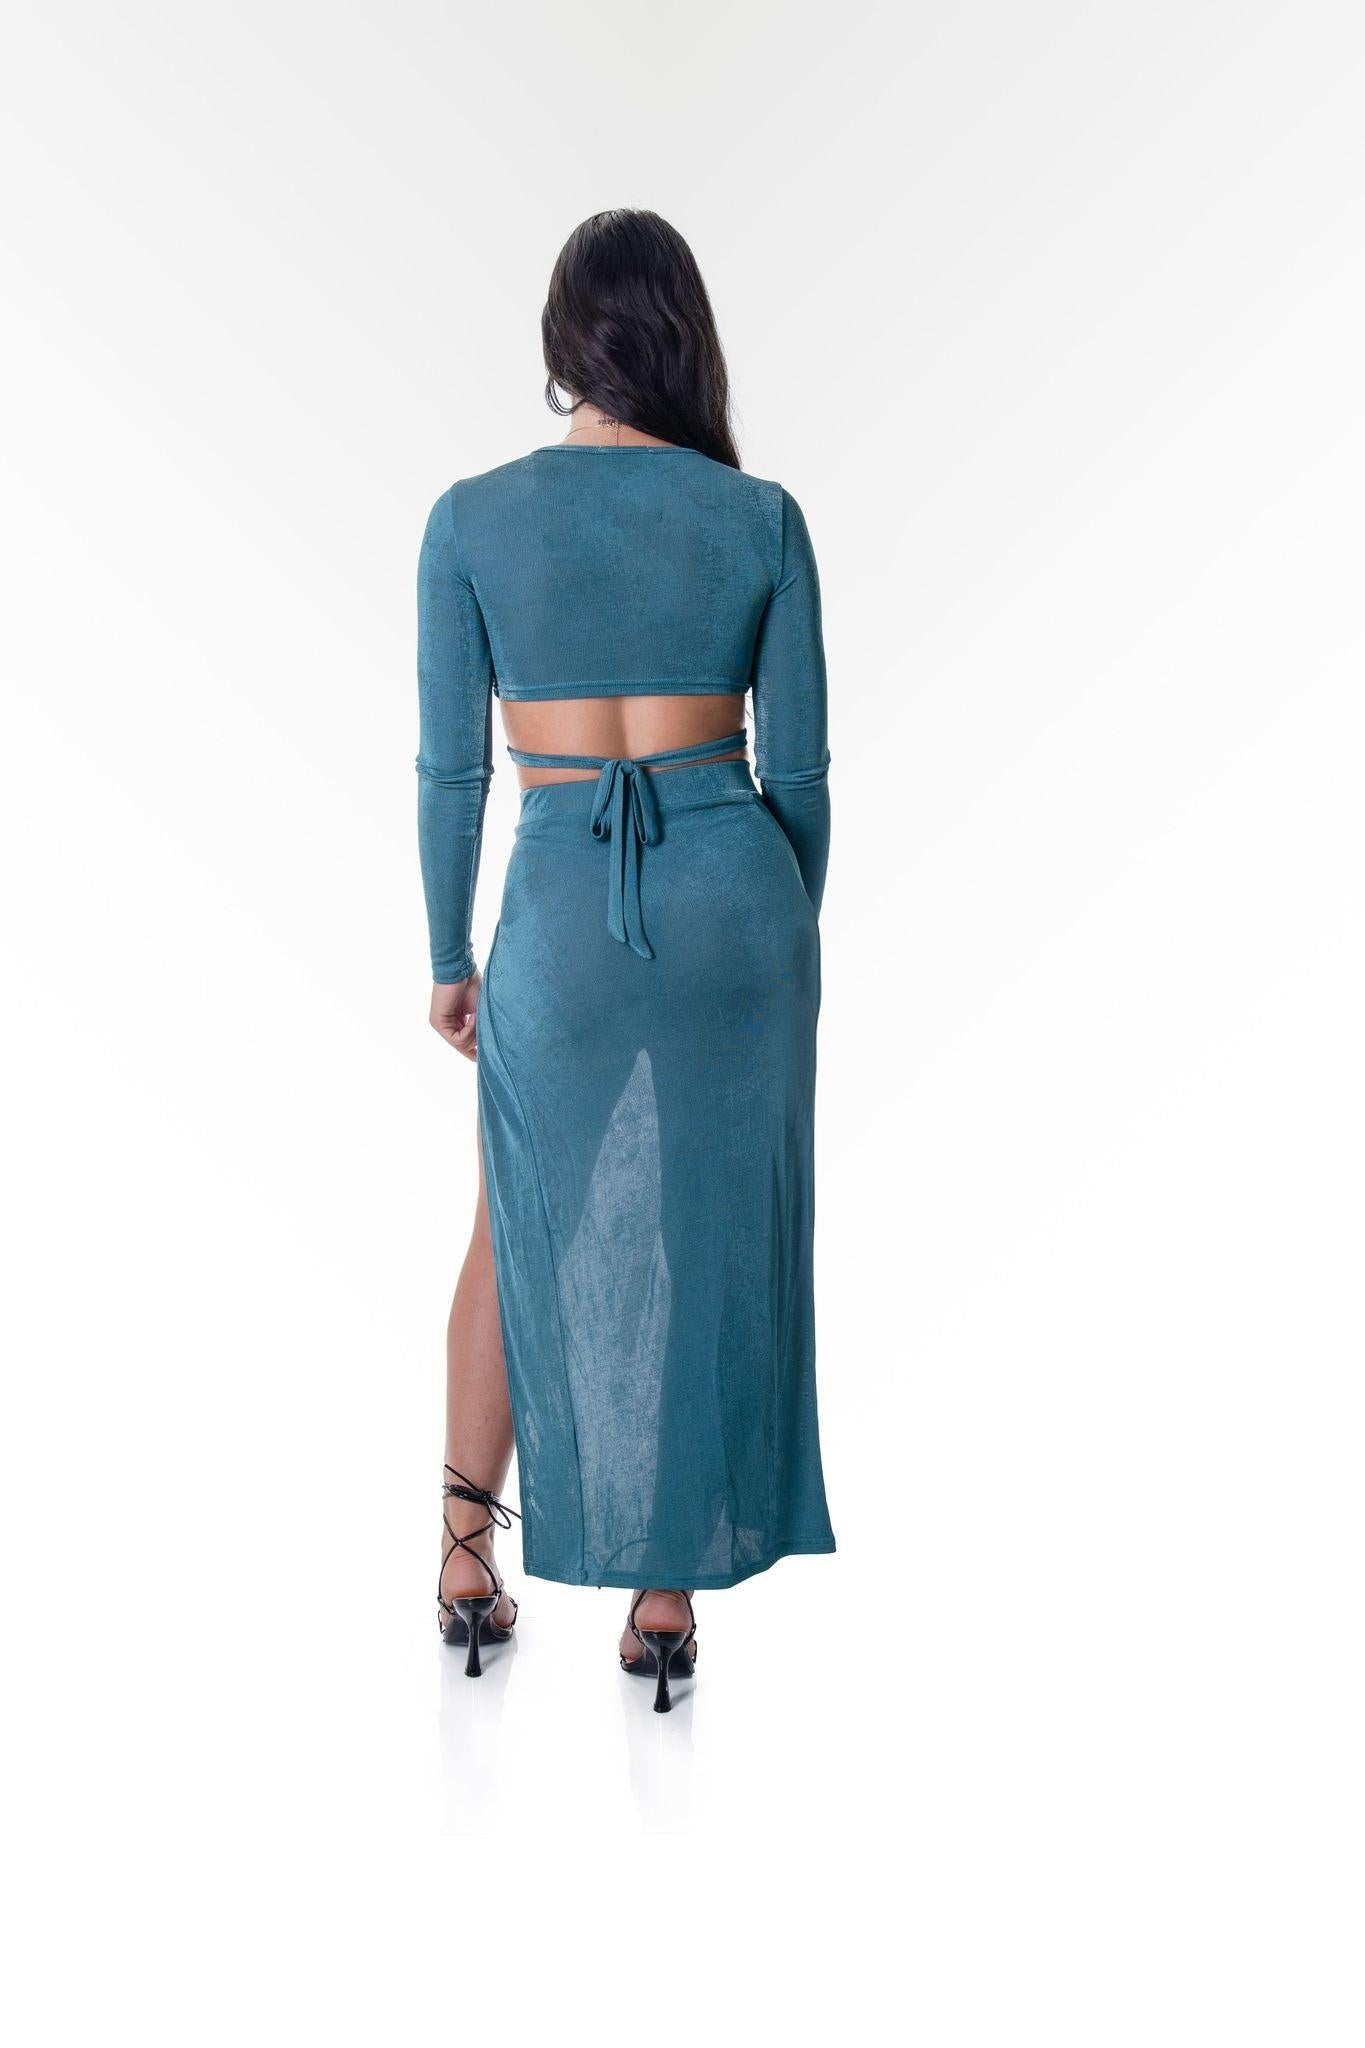 Long Sleeve Ring Crop Top in Turquoise - watts that trend